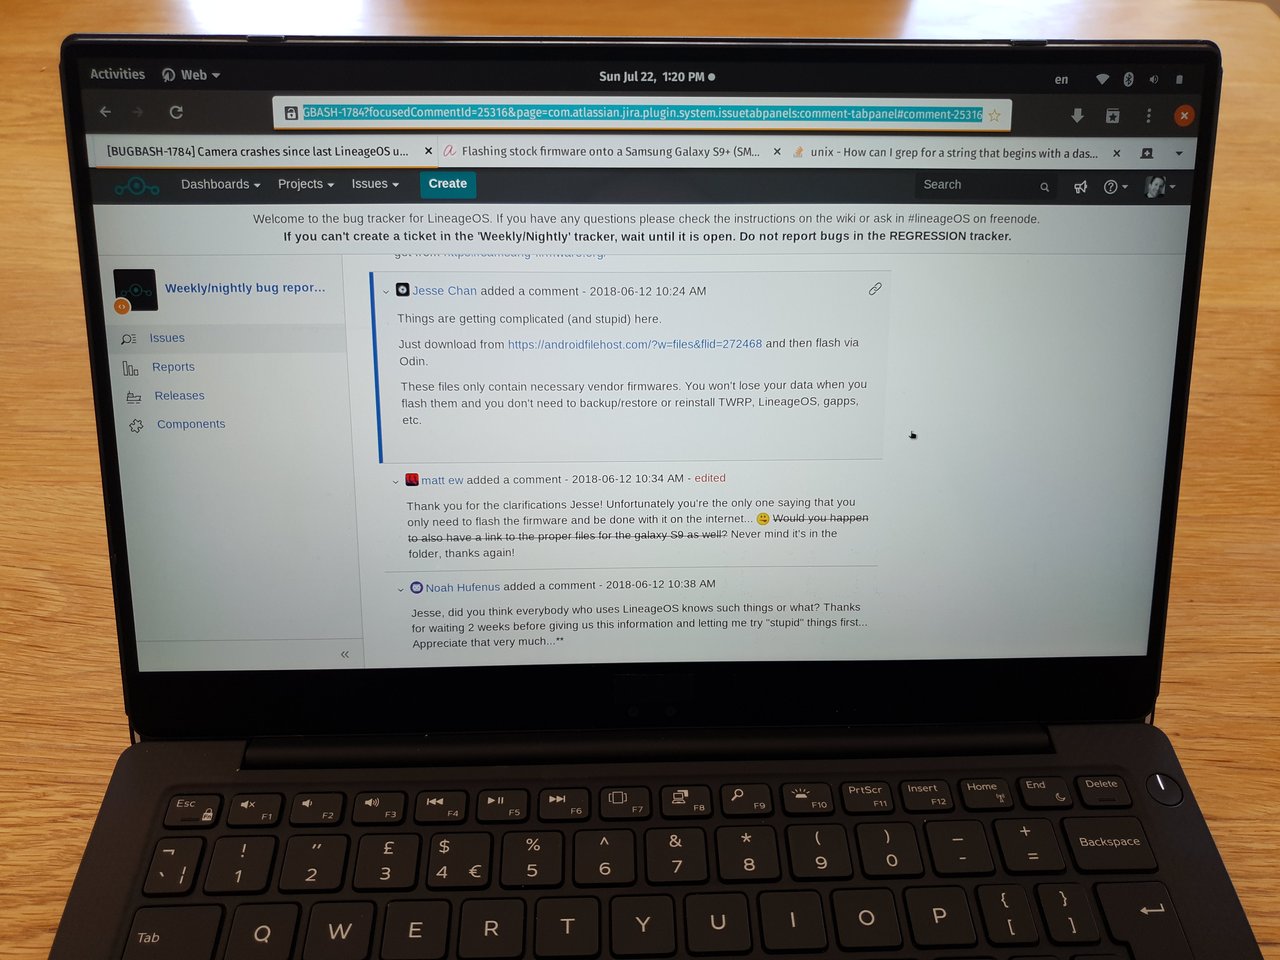 A photo of my XPS 13 on our dining room table. On screen is the Gnome Web browser showing the LineageOS bug thread for the S9 camera issue, focussed on the comment by Jesse Chan with the link to the vendor.img file that works to fix it.